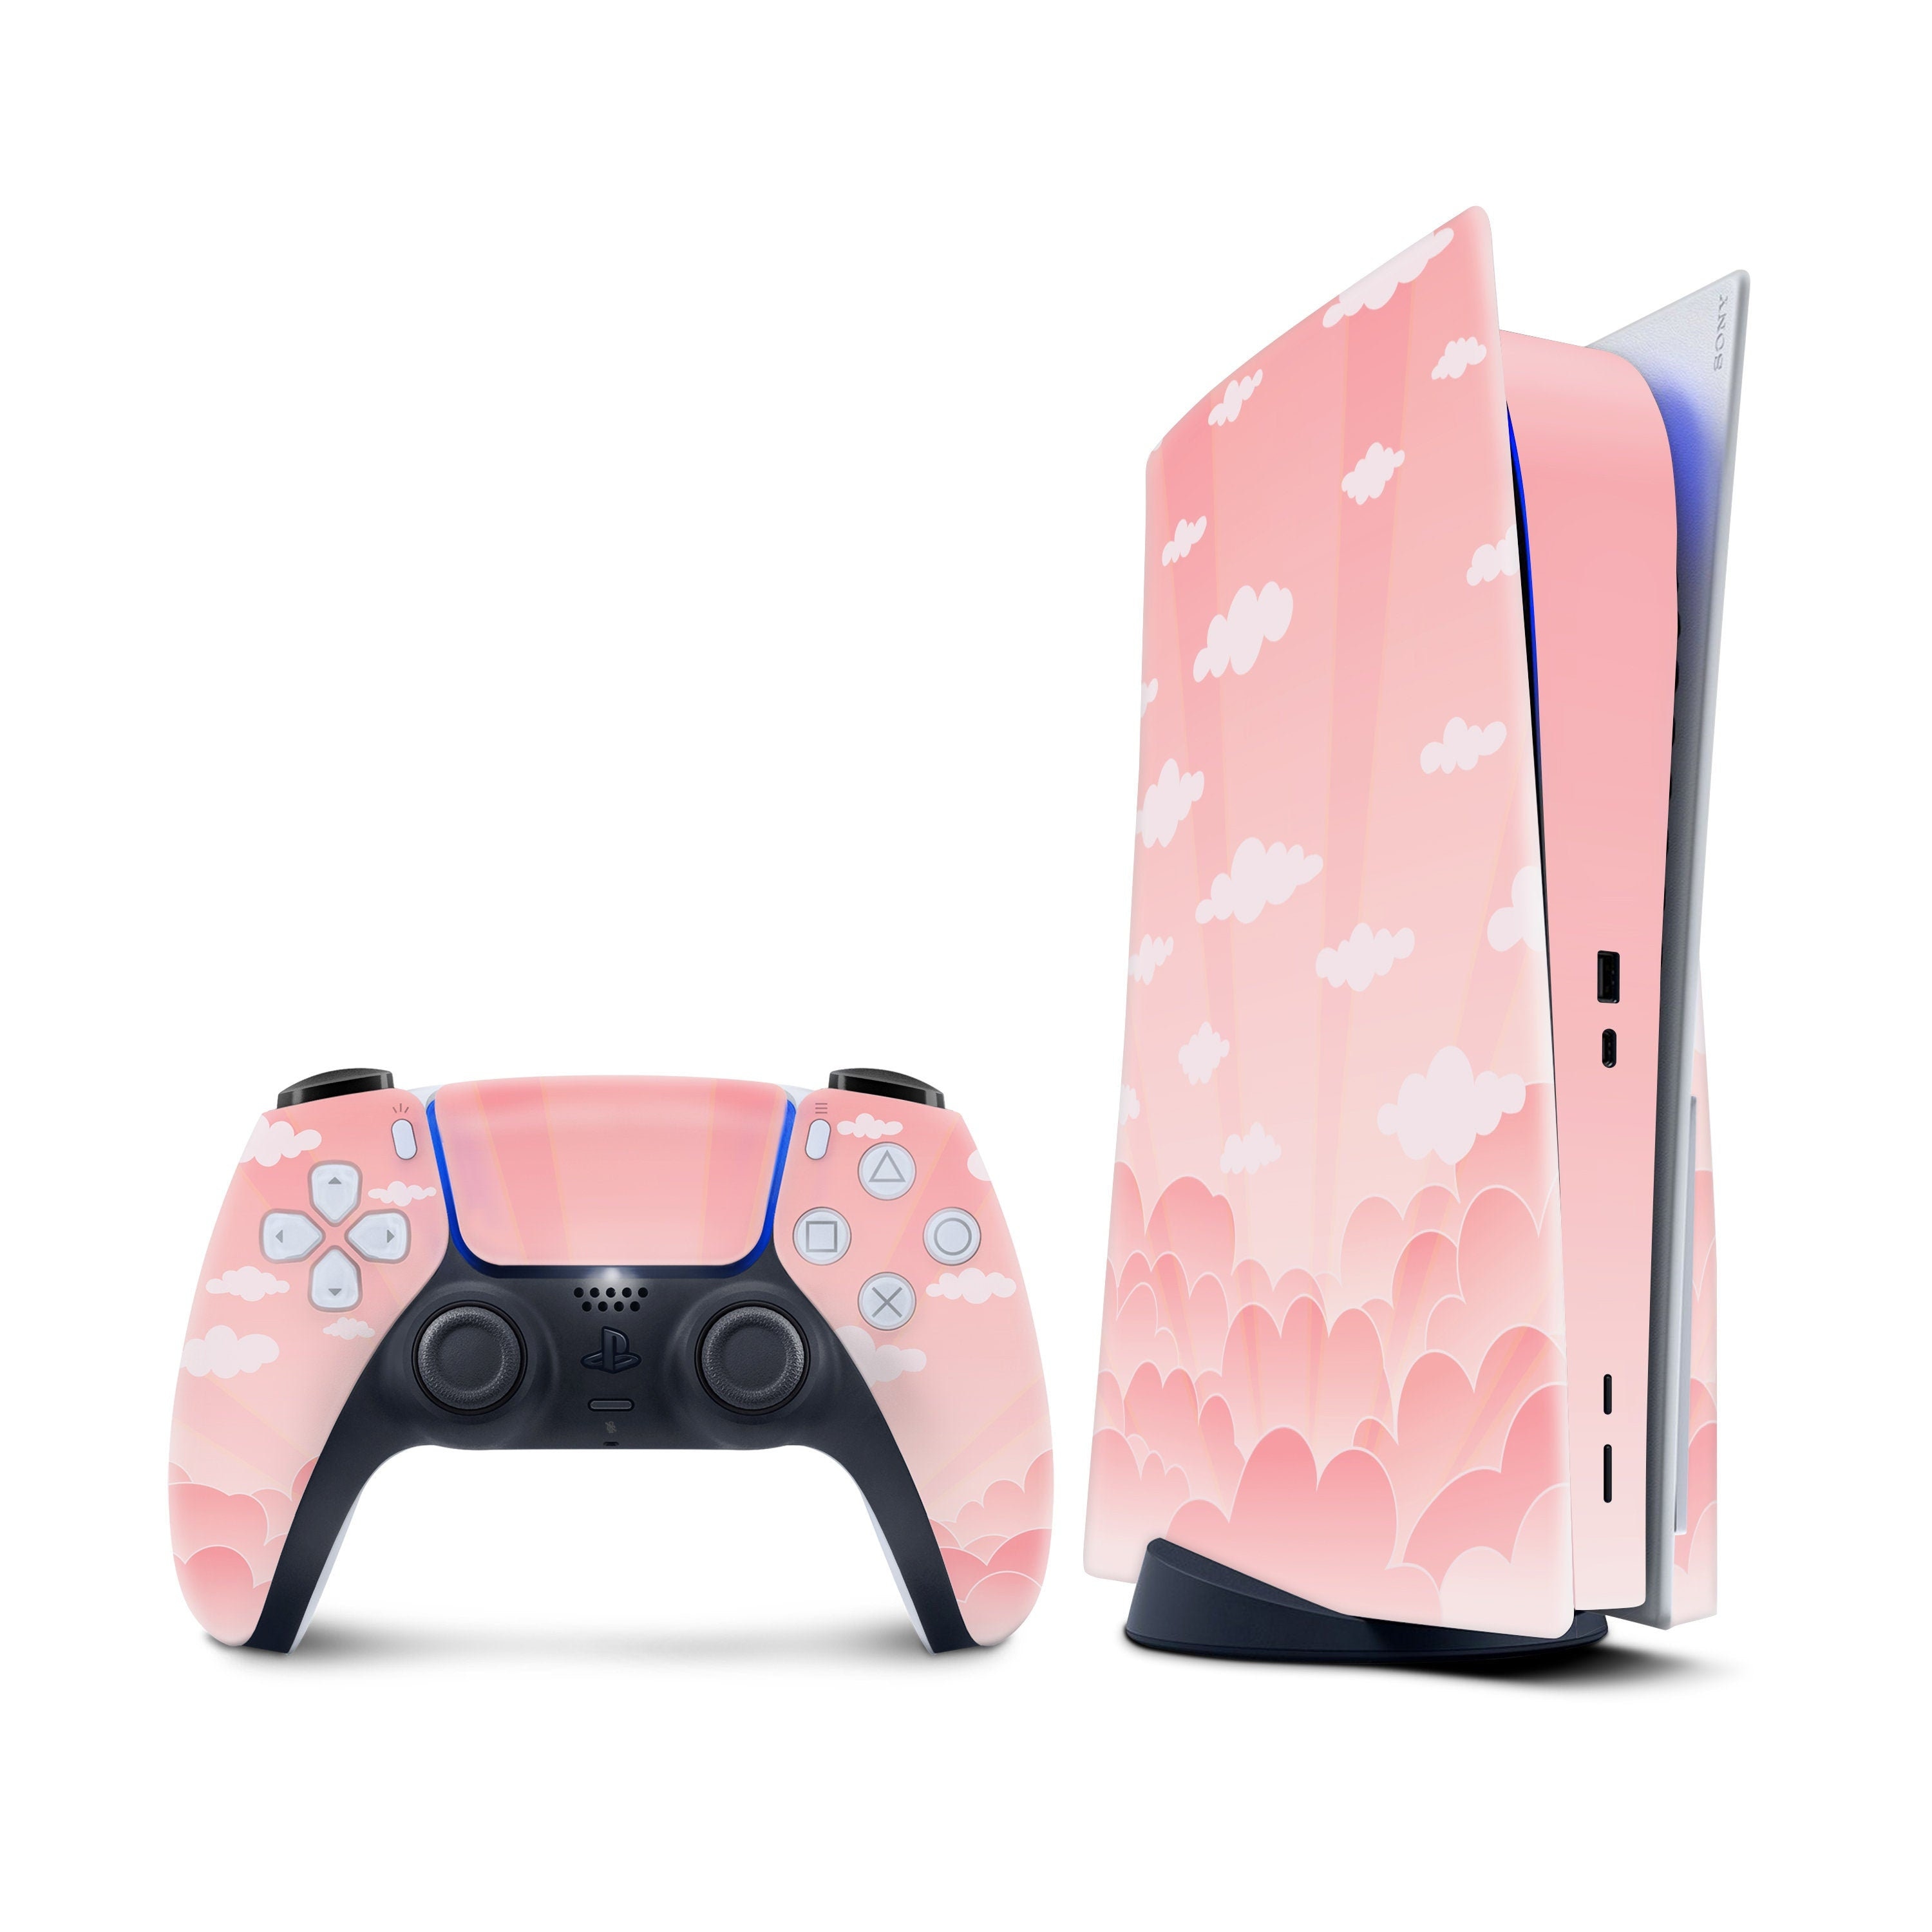 Ps5 Skin Peachy Sky, Pink Sony Playstation 5 Controller Skin Clouds, Vinyl  3m Stickers Full Wrap Cover -  Denmark